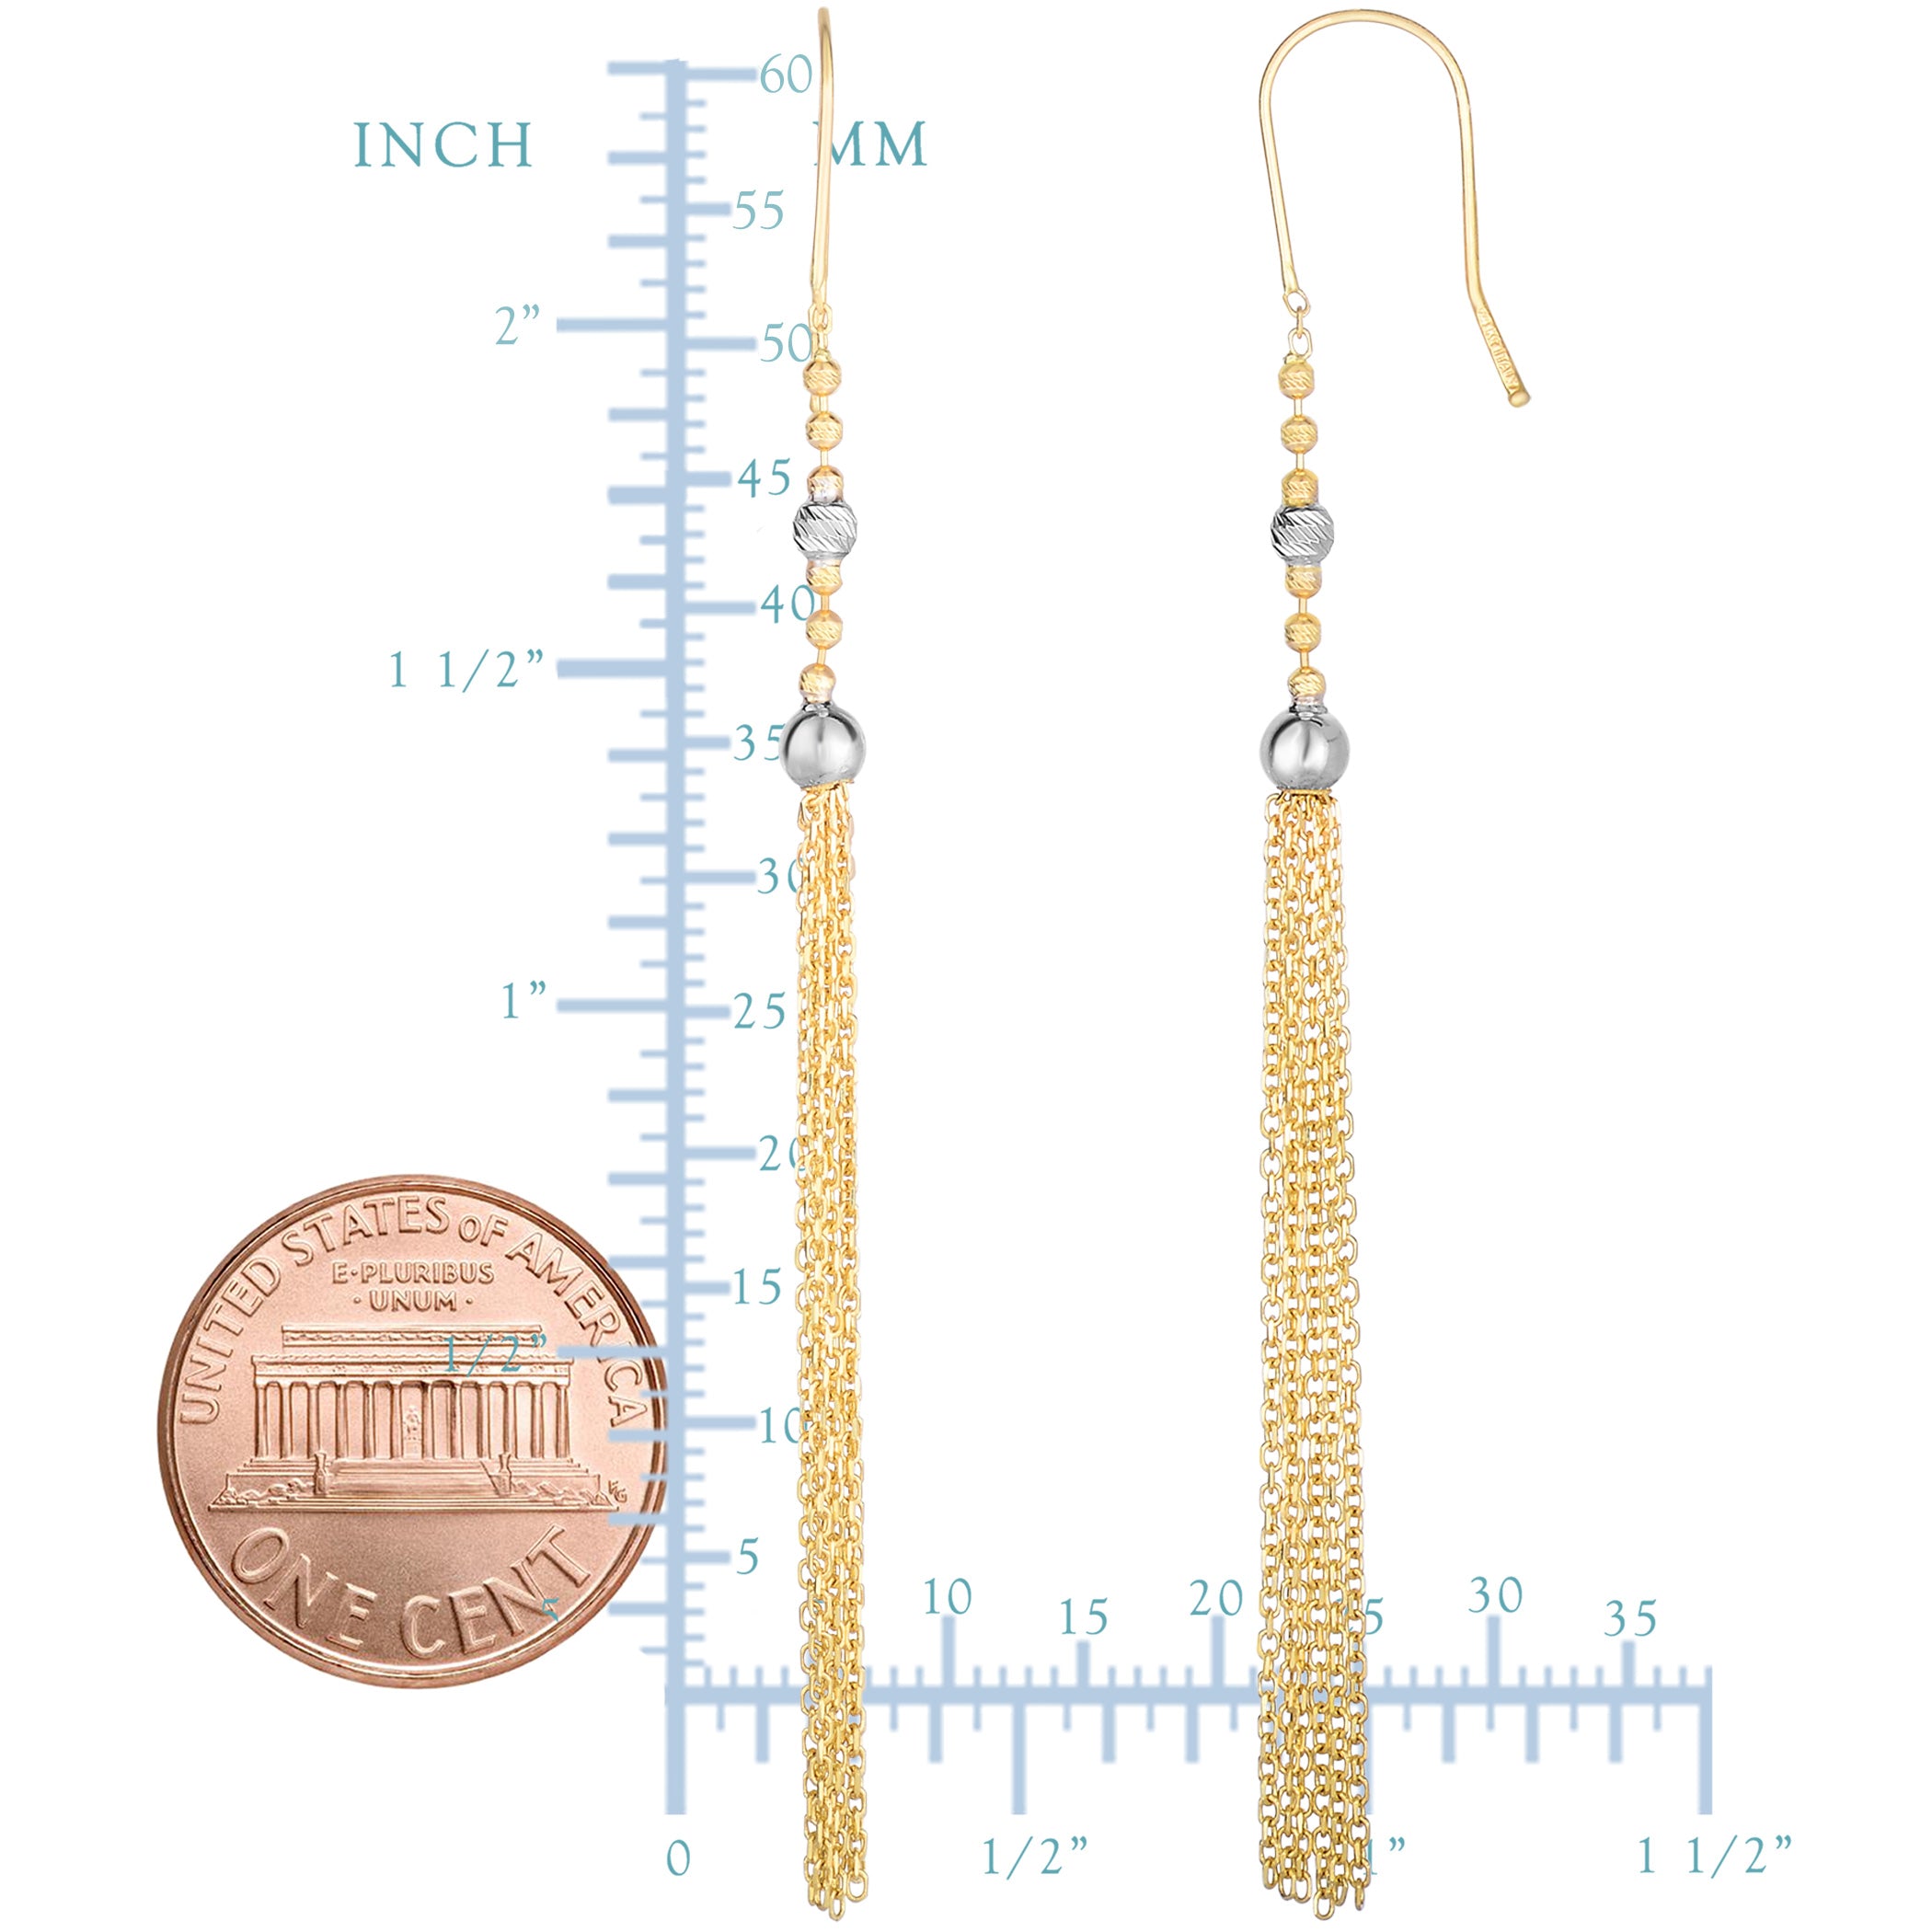 14K Two Tone Gold Diamond Cut Beads With Cable Chain Tassel Drop Earrings